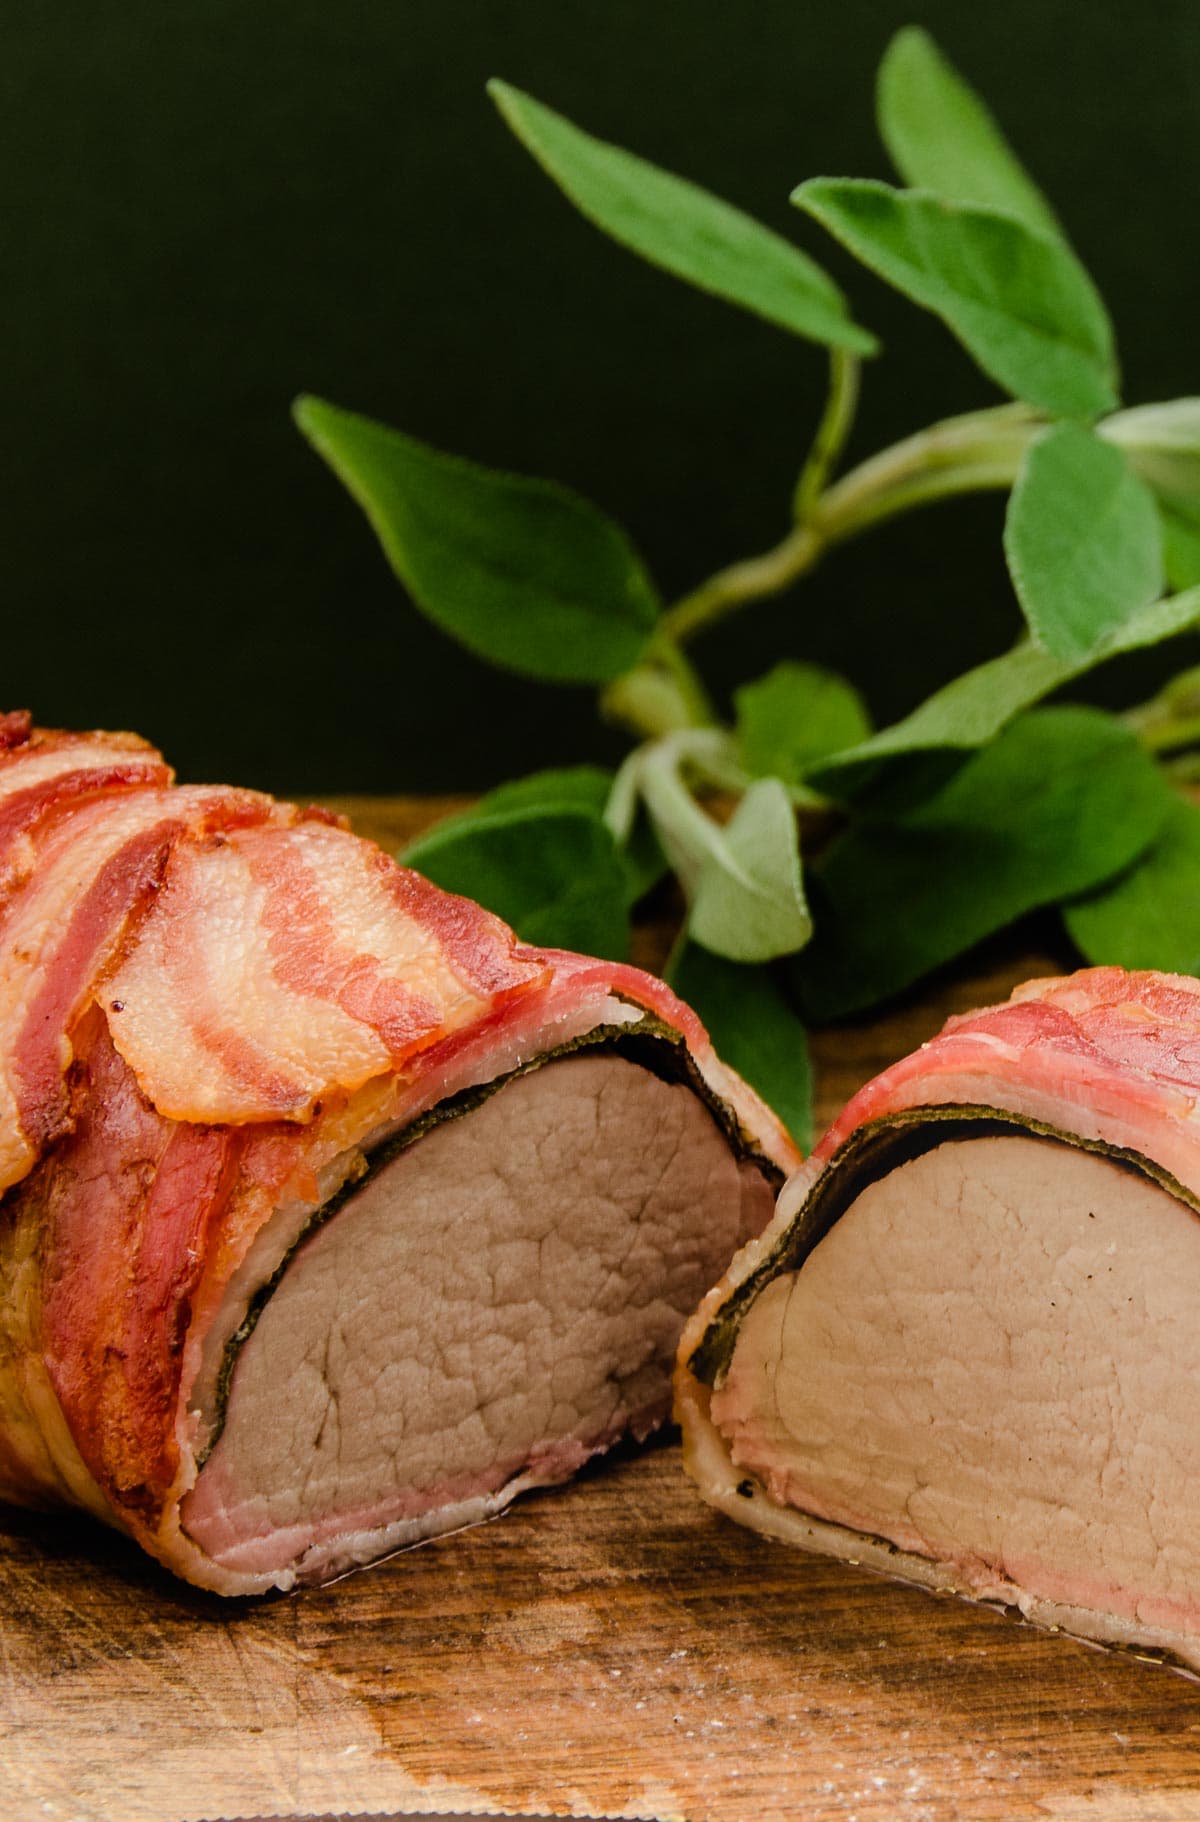 Pork fillet wrapped in bacon and sage sliced in half to show the inside and some fresh sage leaves to the back.